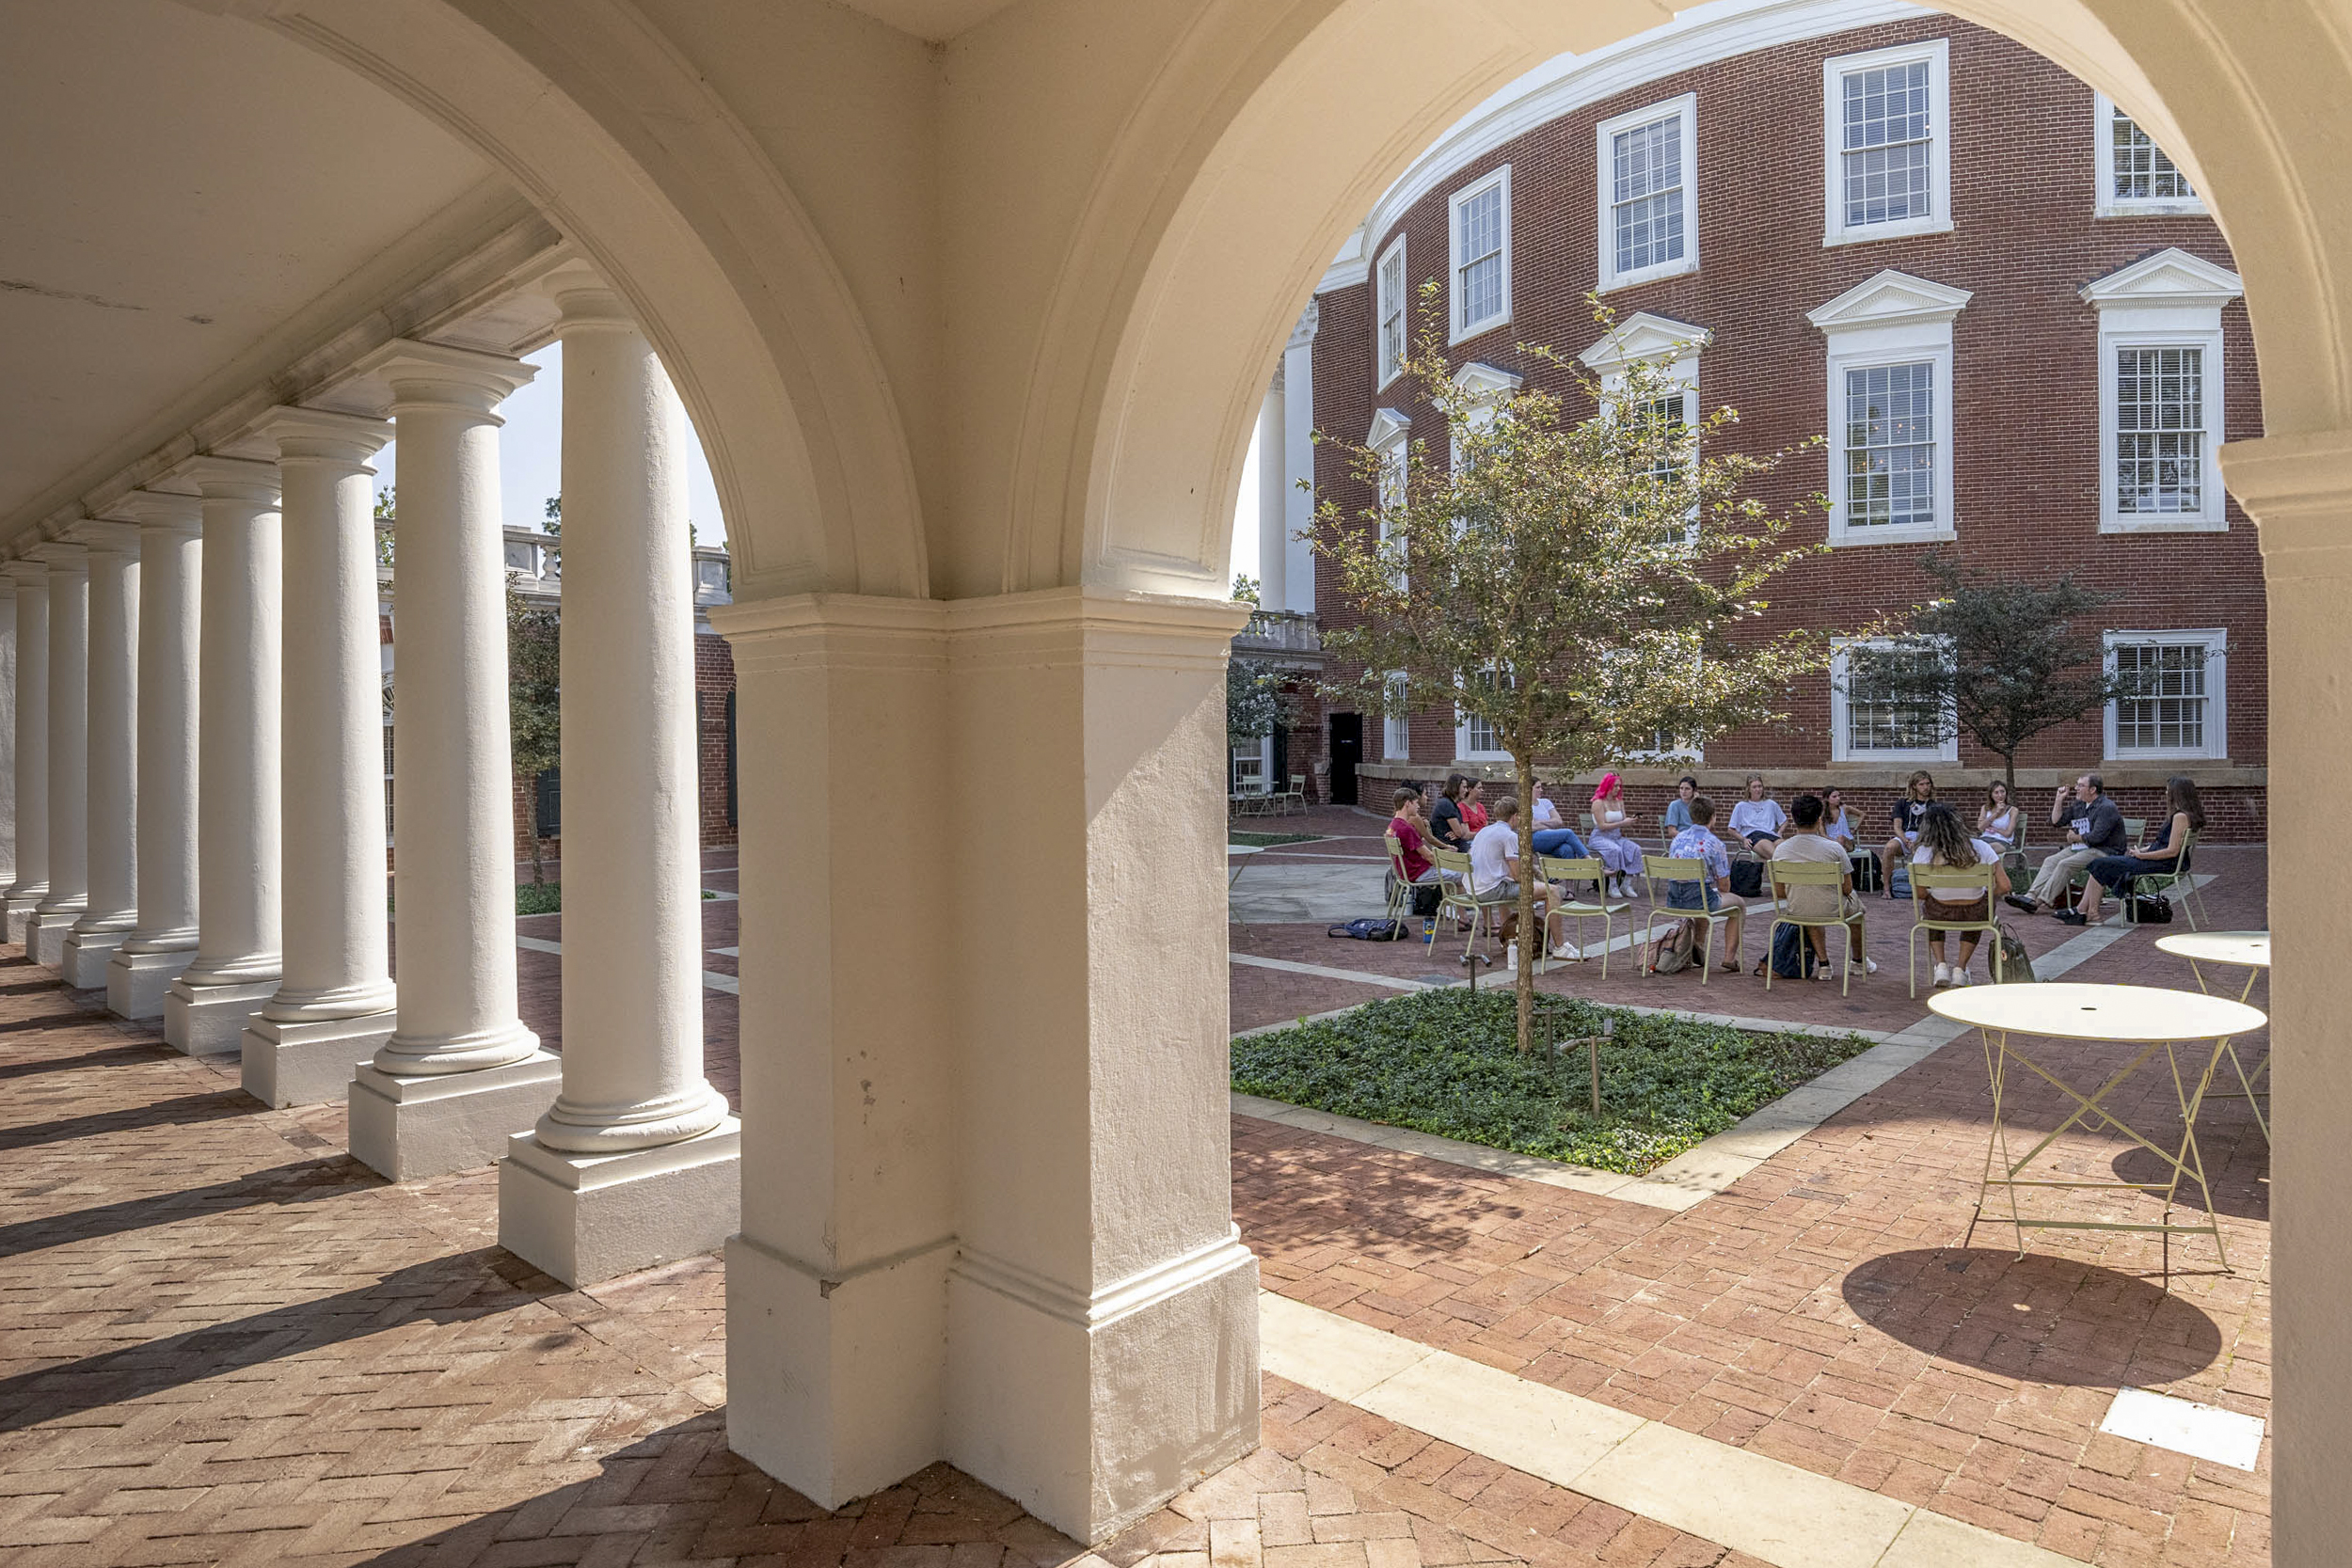 Looking through the arched entrance way to the Rotunda quart yard at a class sitting in metal chairs in a circle